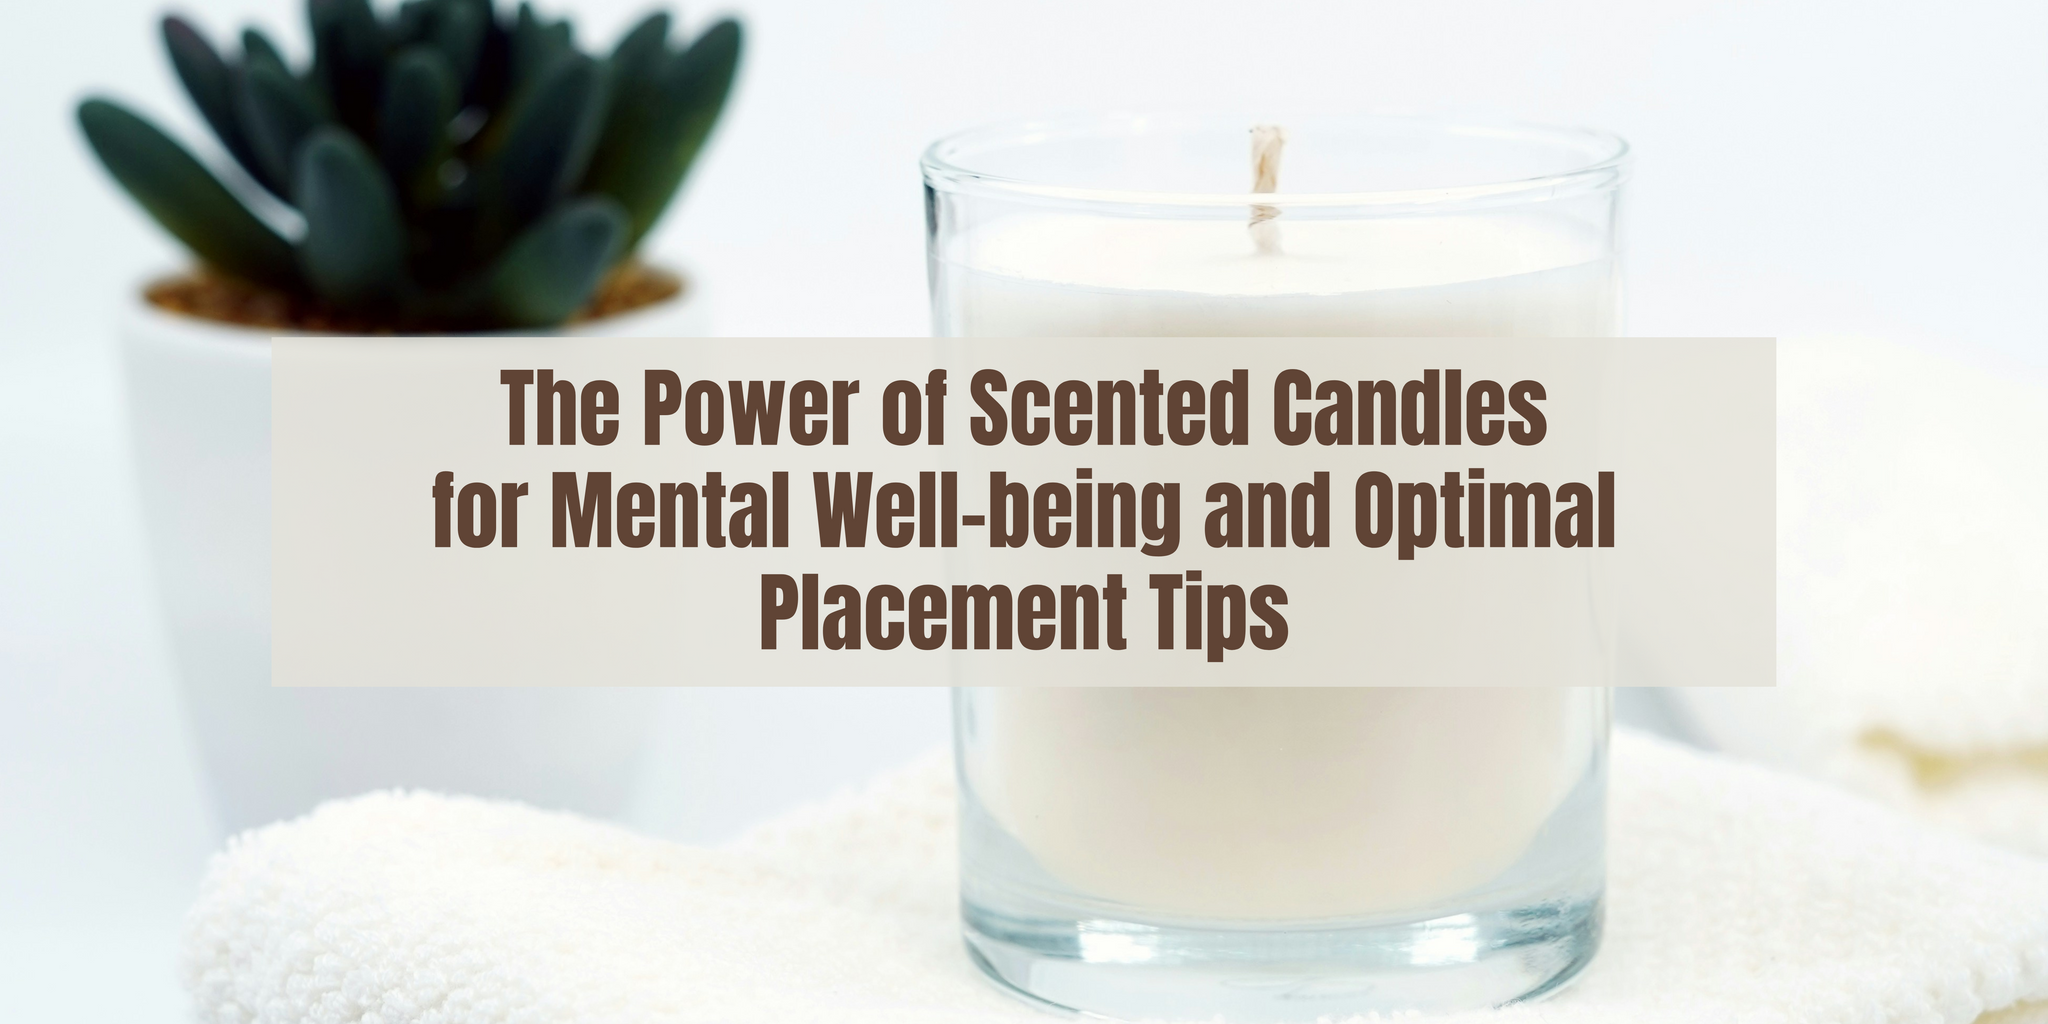 The Power of Scented Candles for Mental Well-being and Optimal Placement Tips